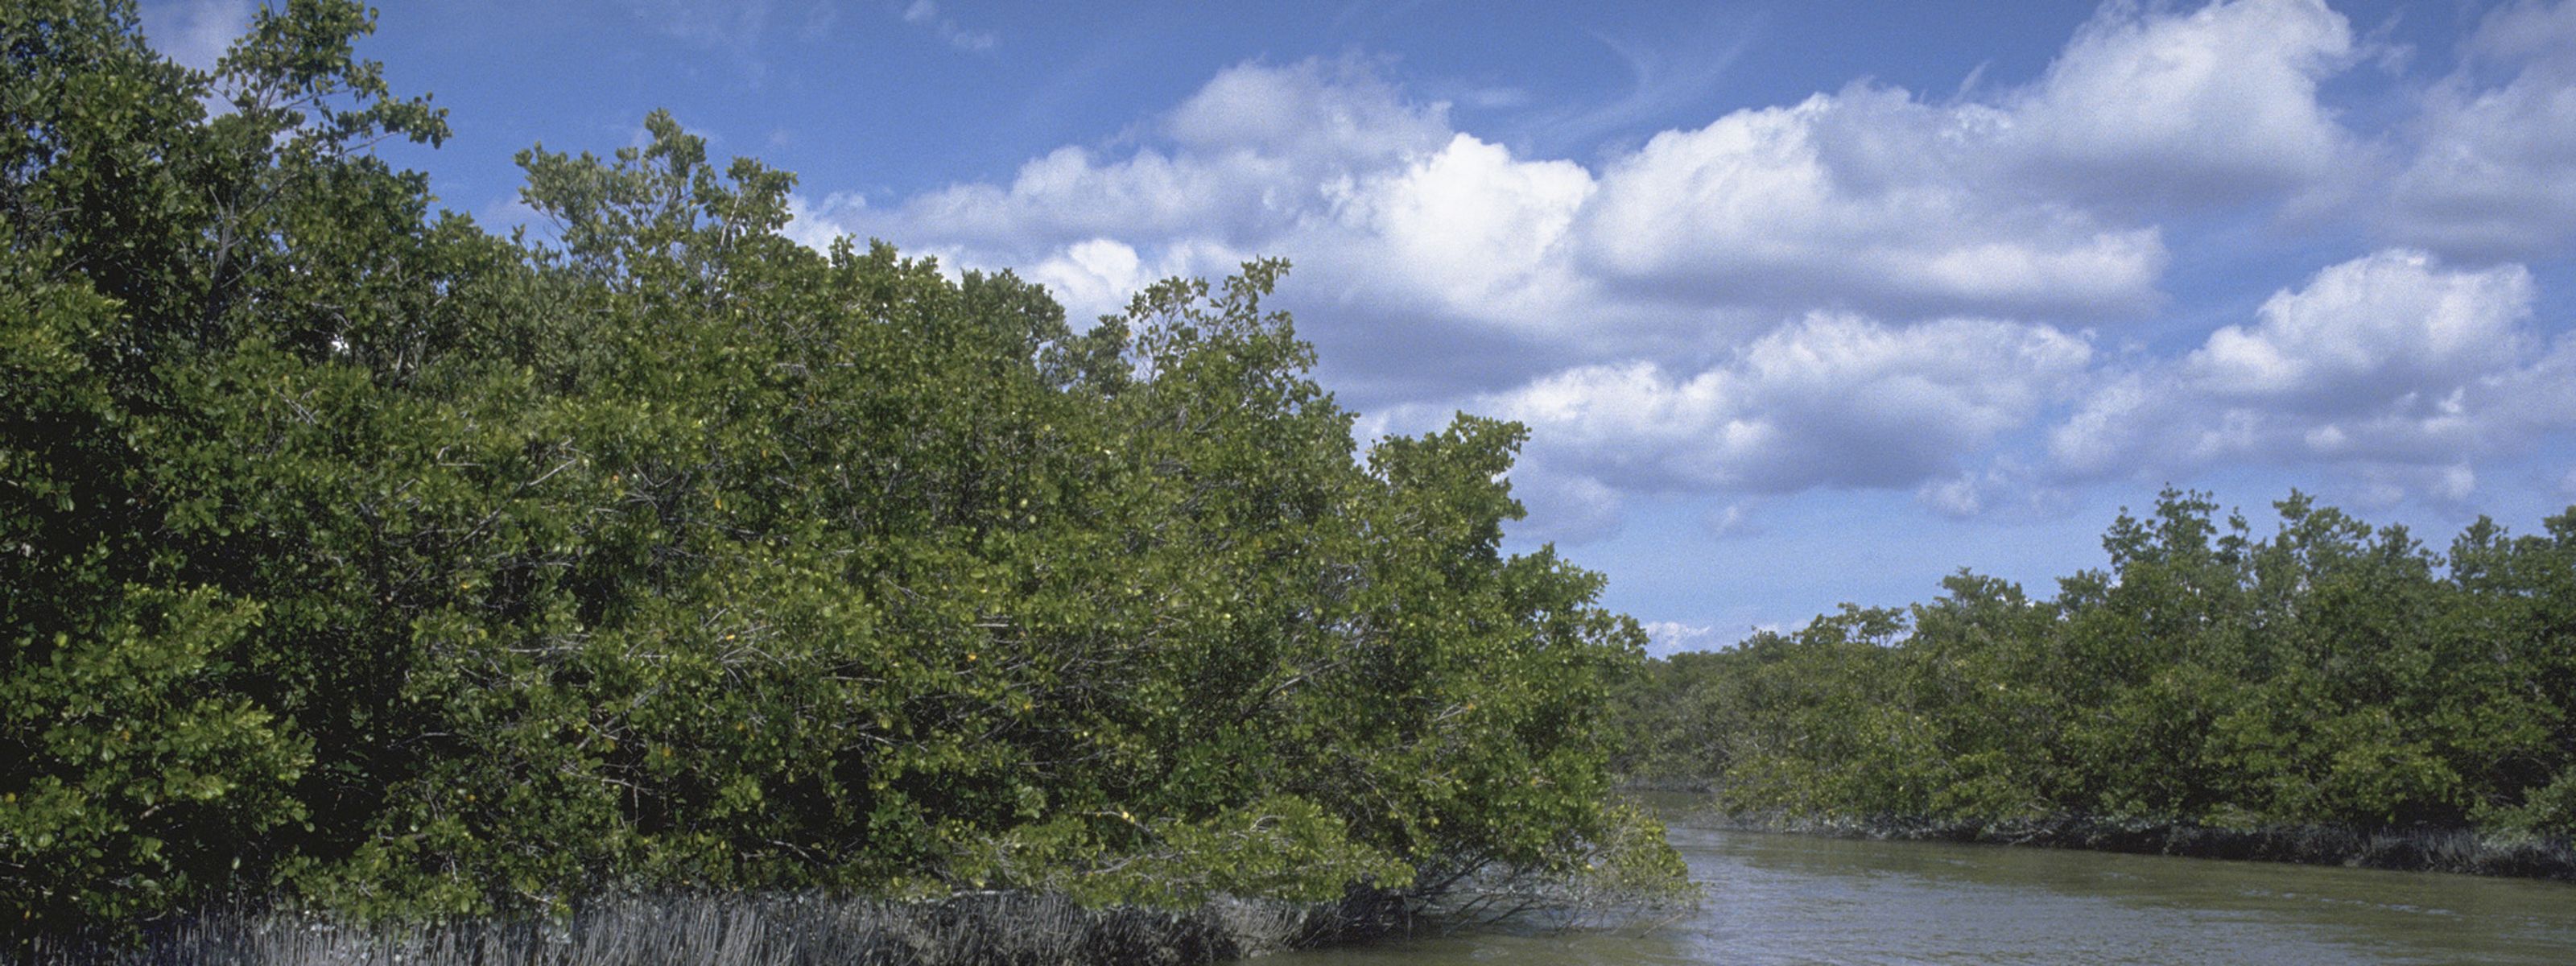 Dense forests of black mangroves grow along the edge of a body of water.